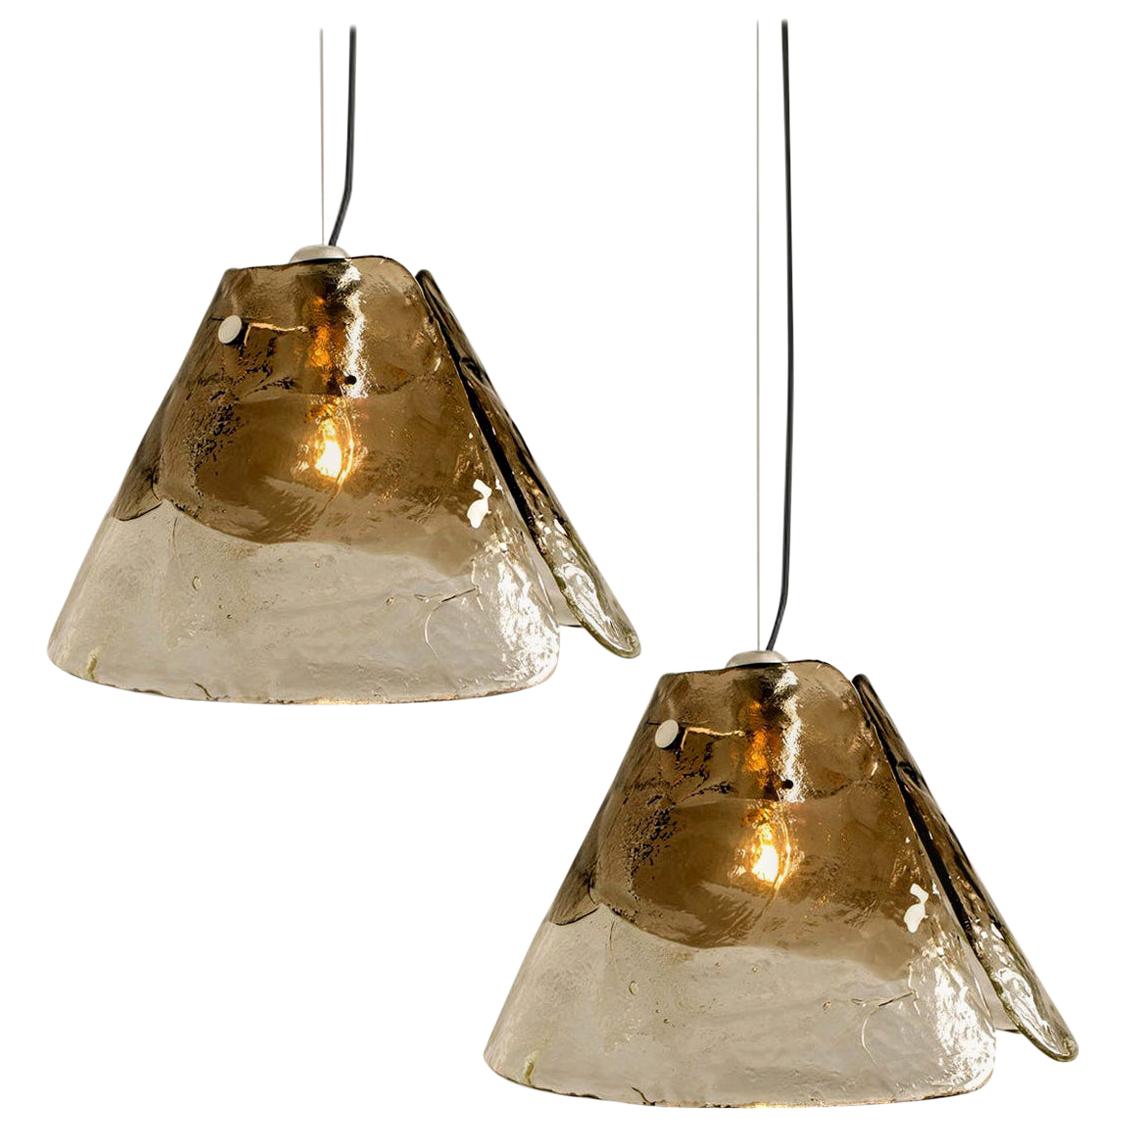 1 of the 2 Pendant Lamps by Carlo Nason for Mazzega